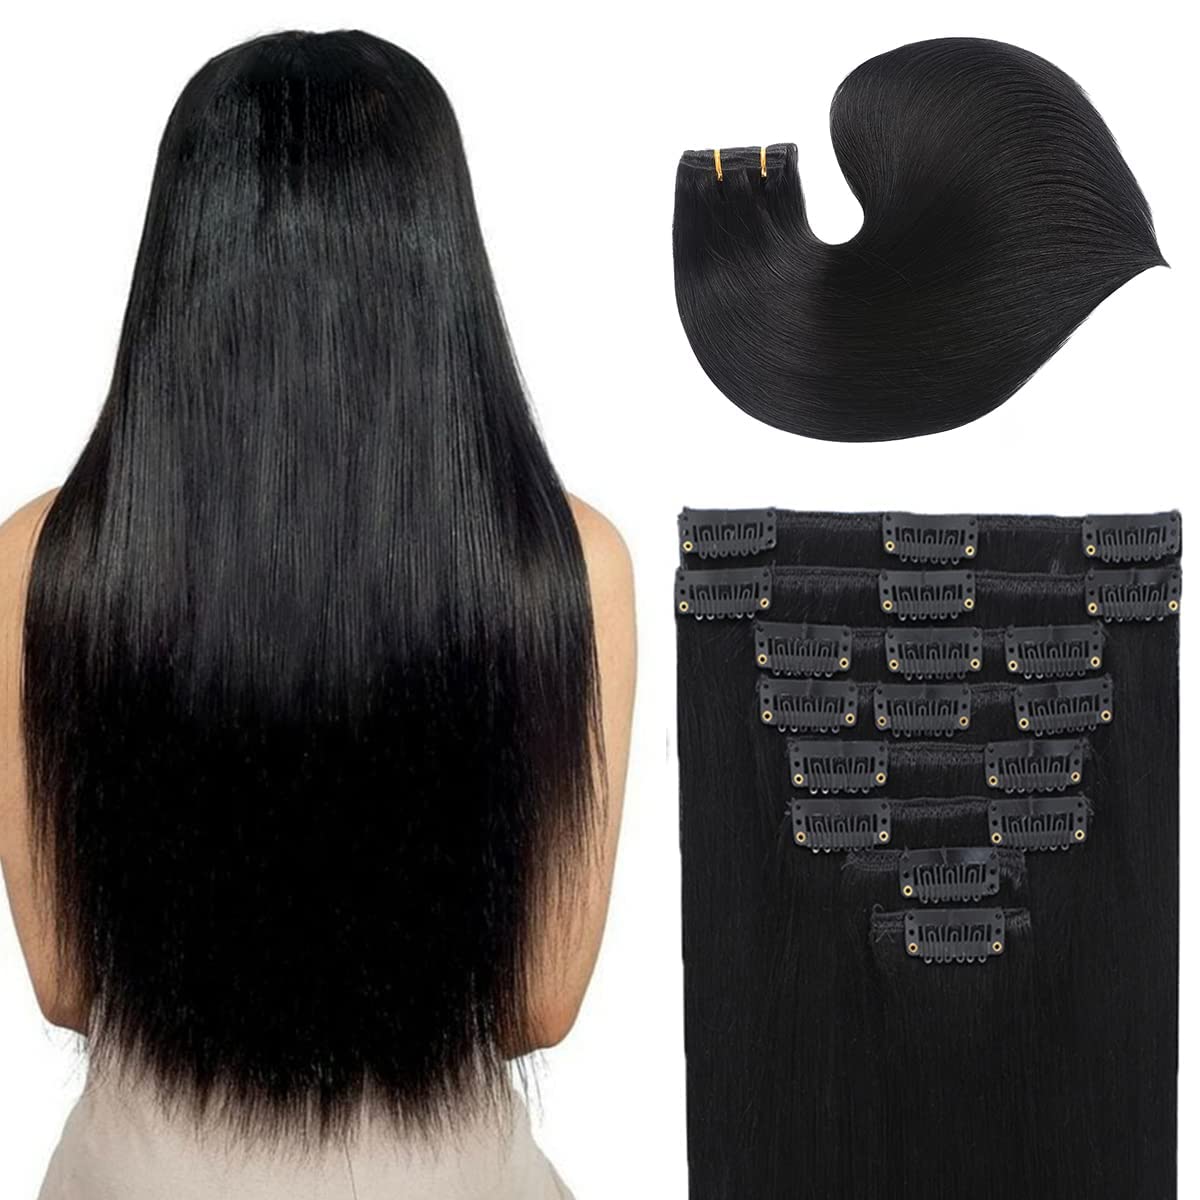 Russian Virgin Remy Human Hair, Clip-In Hair Extensions - 28 Inches / Curly / from Virgin Hair